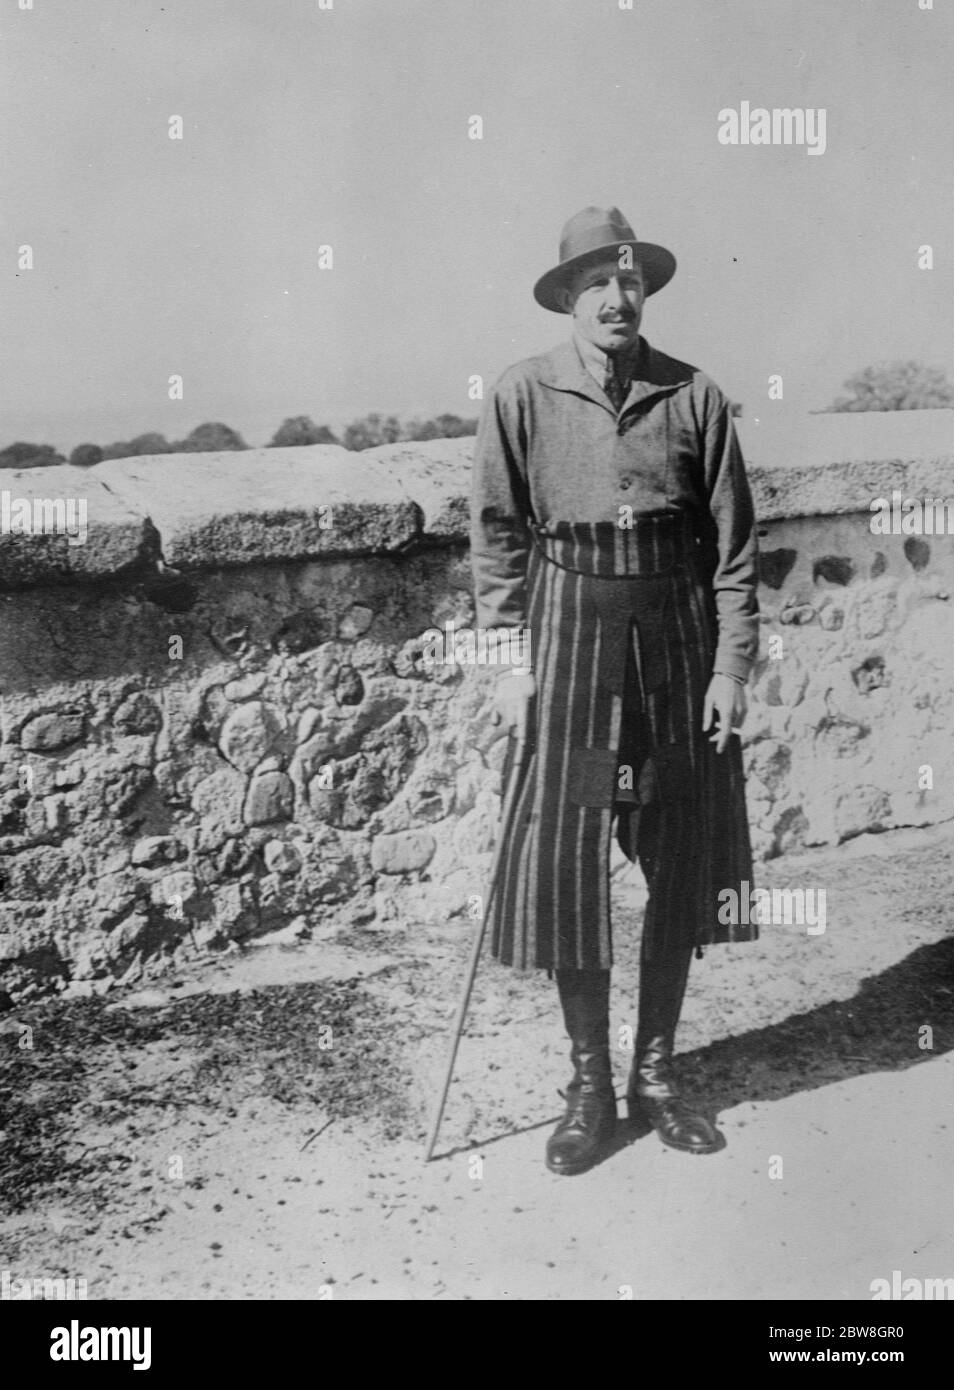 A king in an Apron . A interesting photograph of the King of Spain wearing an apron during a shooting expedition . 29 May 1930 Stock Photo